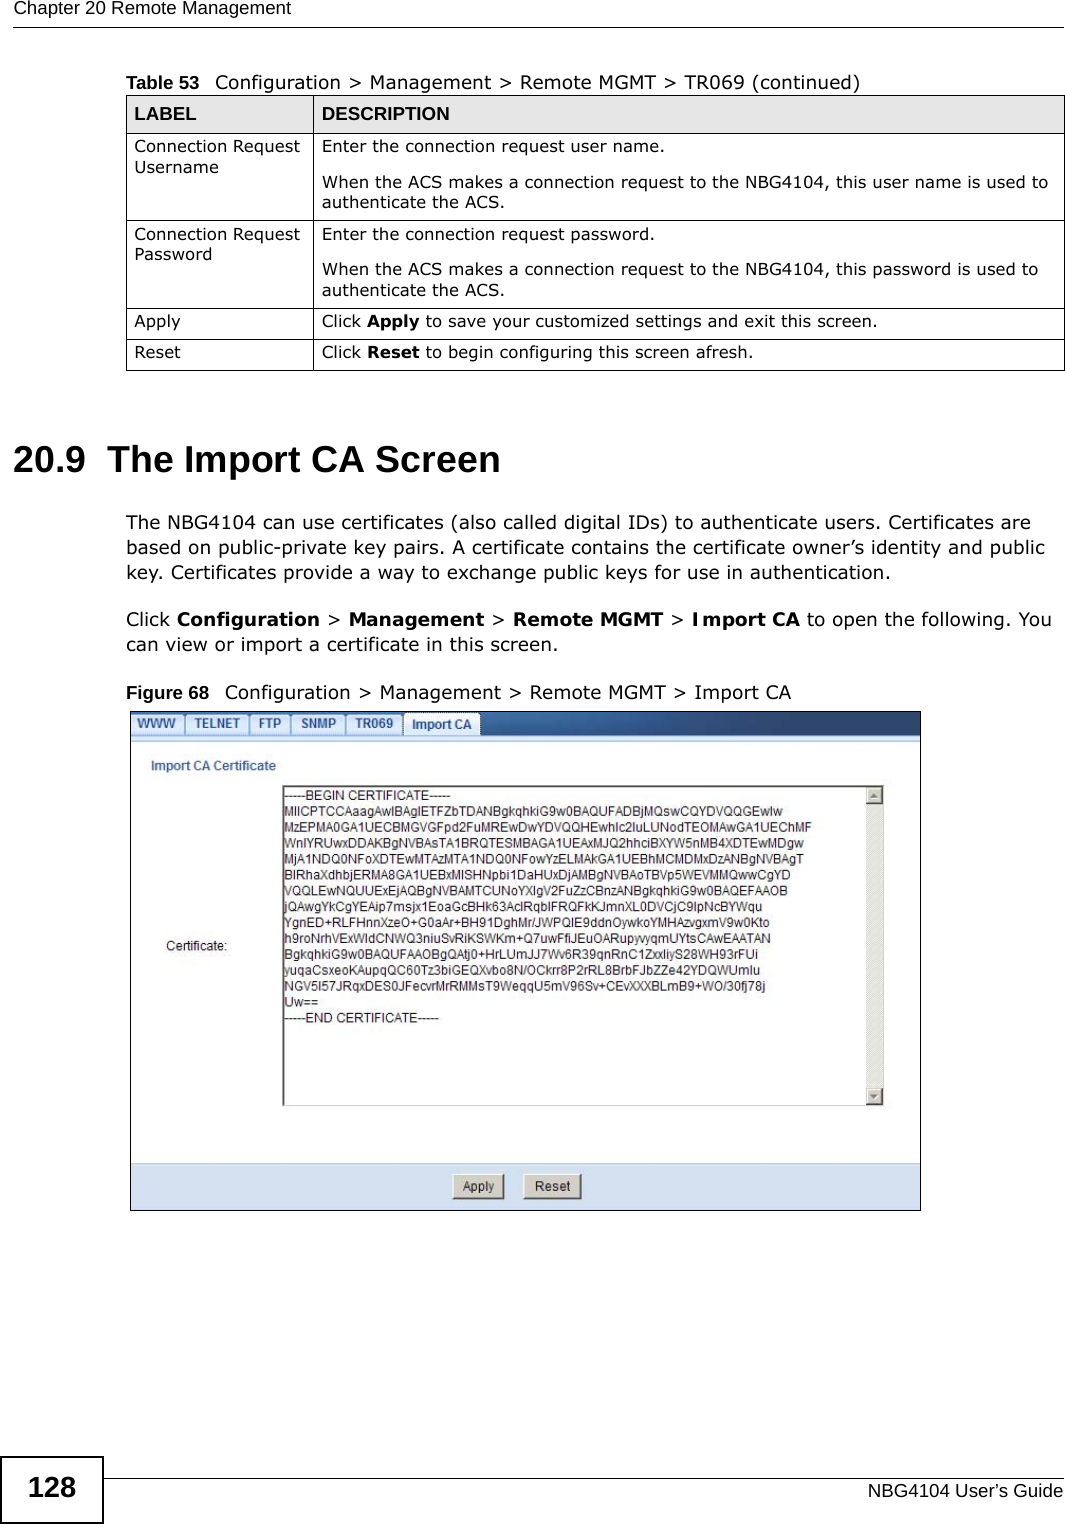 Chapter 20 Remote ManagementNBG4104 User’s Guide12820.9  The Import CA ScreenThe NBG4104 can use certificates (also called digital IDs) to authenticate users. Certificates are based on public-private key pairs. A certificate contains the certificate owner’s identity and public key. Certificates provide a way to exchange public keys for use in authentication. Click Configuration &gt; Management &gt; Remote MGMT &gt; Import CA to open the following. You can view or import a certificate in this screen. Figure 68   Configuration &gt; Management &gt; Remote MGMT &gt; Import CAConnection Request UsernameEnter the connection request user name.When the ACS makes a connection request to the NBG4104, this user name is used to authenticate the ACS.Connection Request PasswordEnter the connection request password.When the ACS makes a connection request to the NBG4104, this password is used to authenticate the ACS.Apply Click Apply to save your customized settings and exit this screen. Reset Click Reset to begin configuring this screen afresh.Table 53   Configuration &gt; Management &gt; Remote MGMT &gt; TR069 (continued)LABEL DESCRIPTION